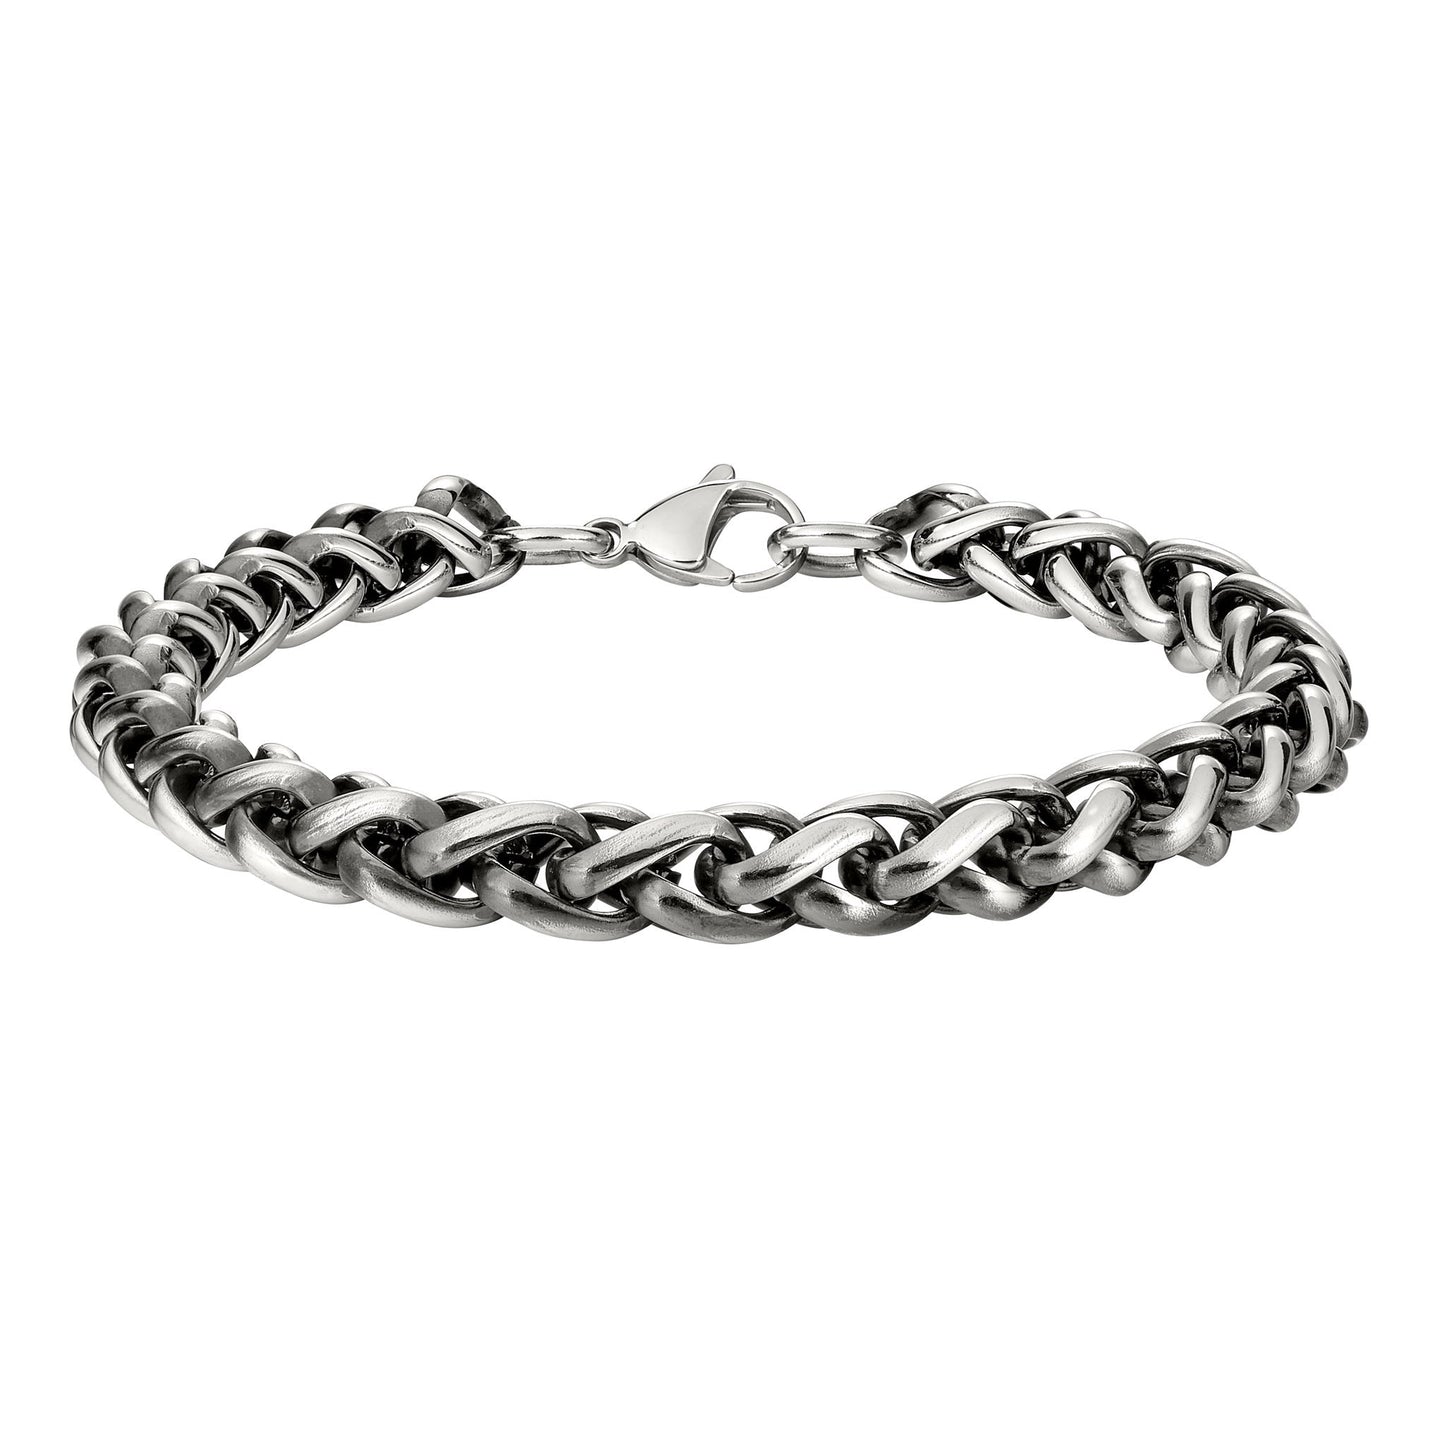 A black & silver stainless steel men's bracelet displayed on a neutral white background.